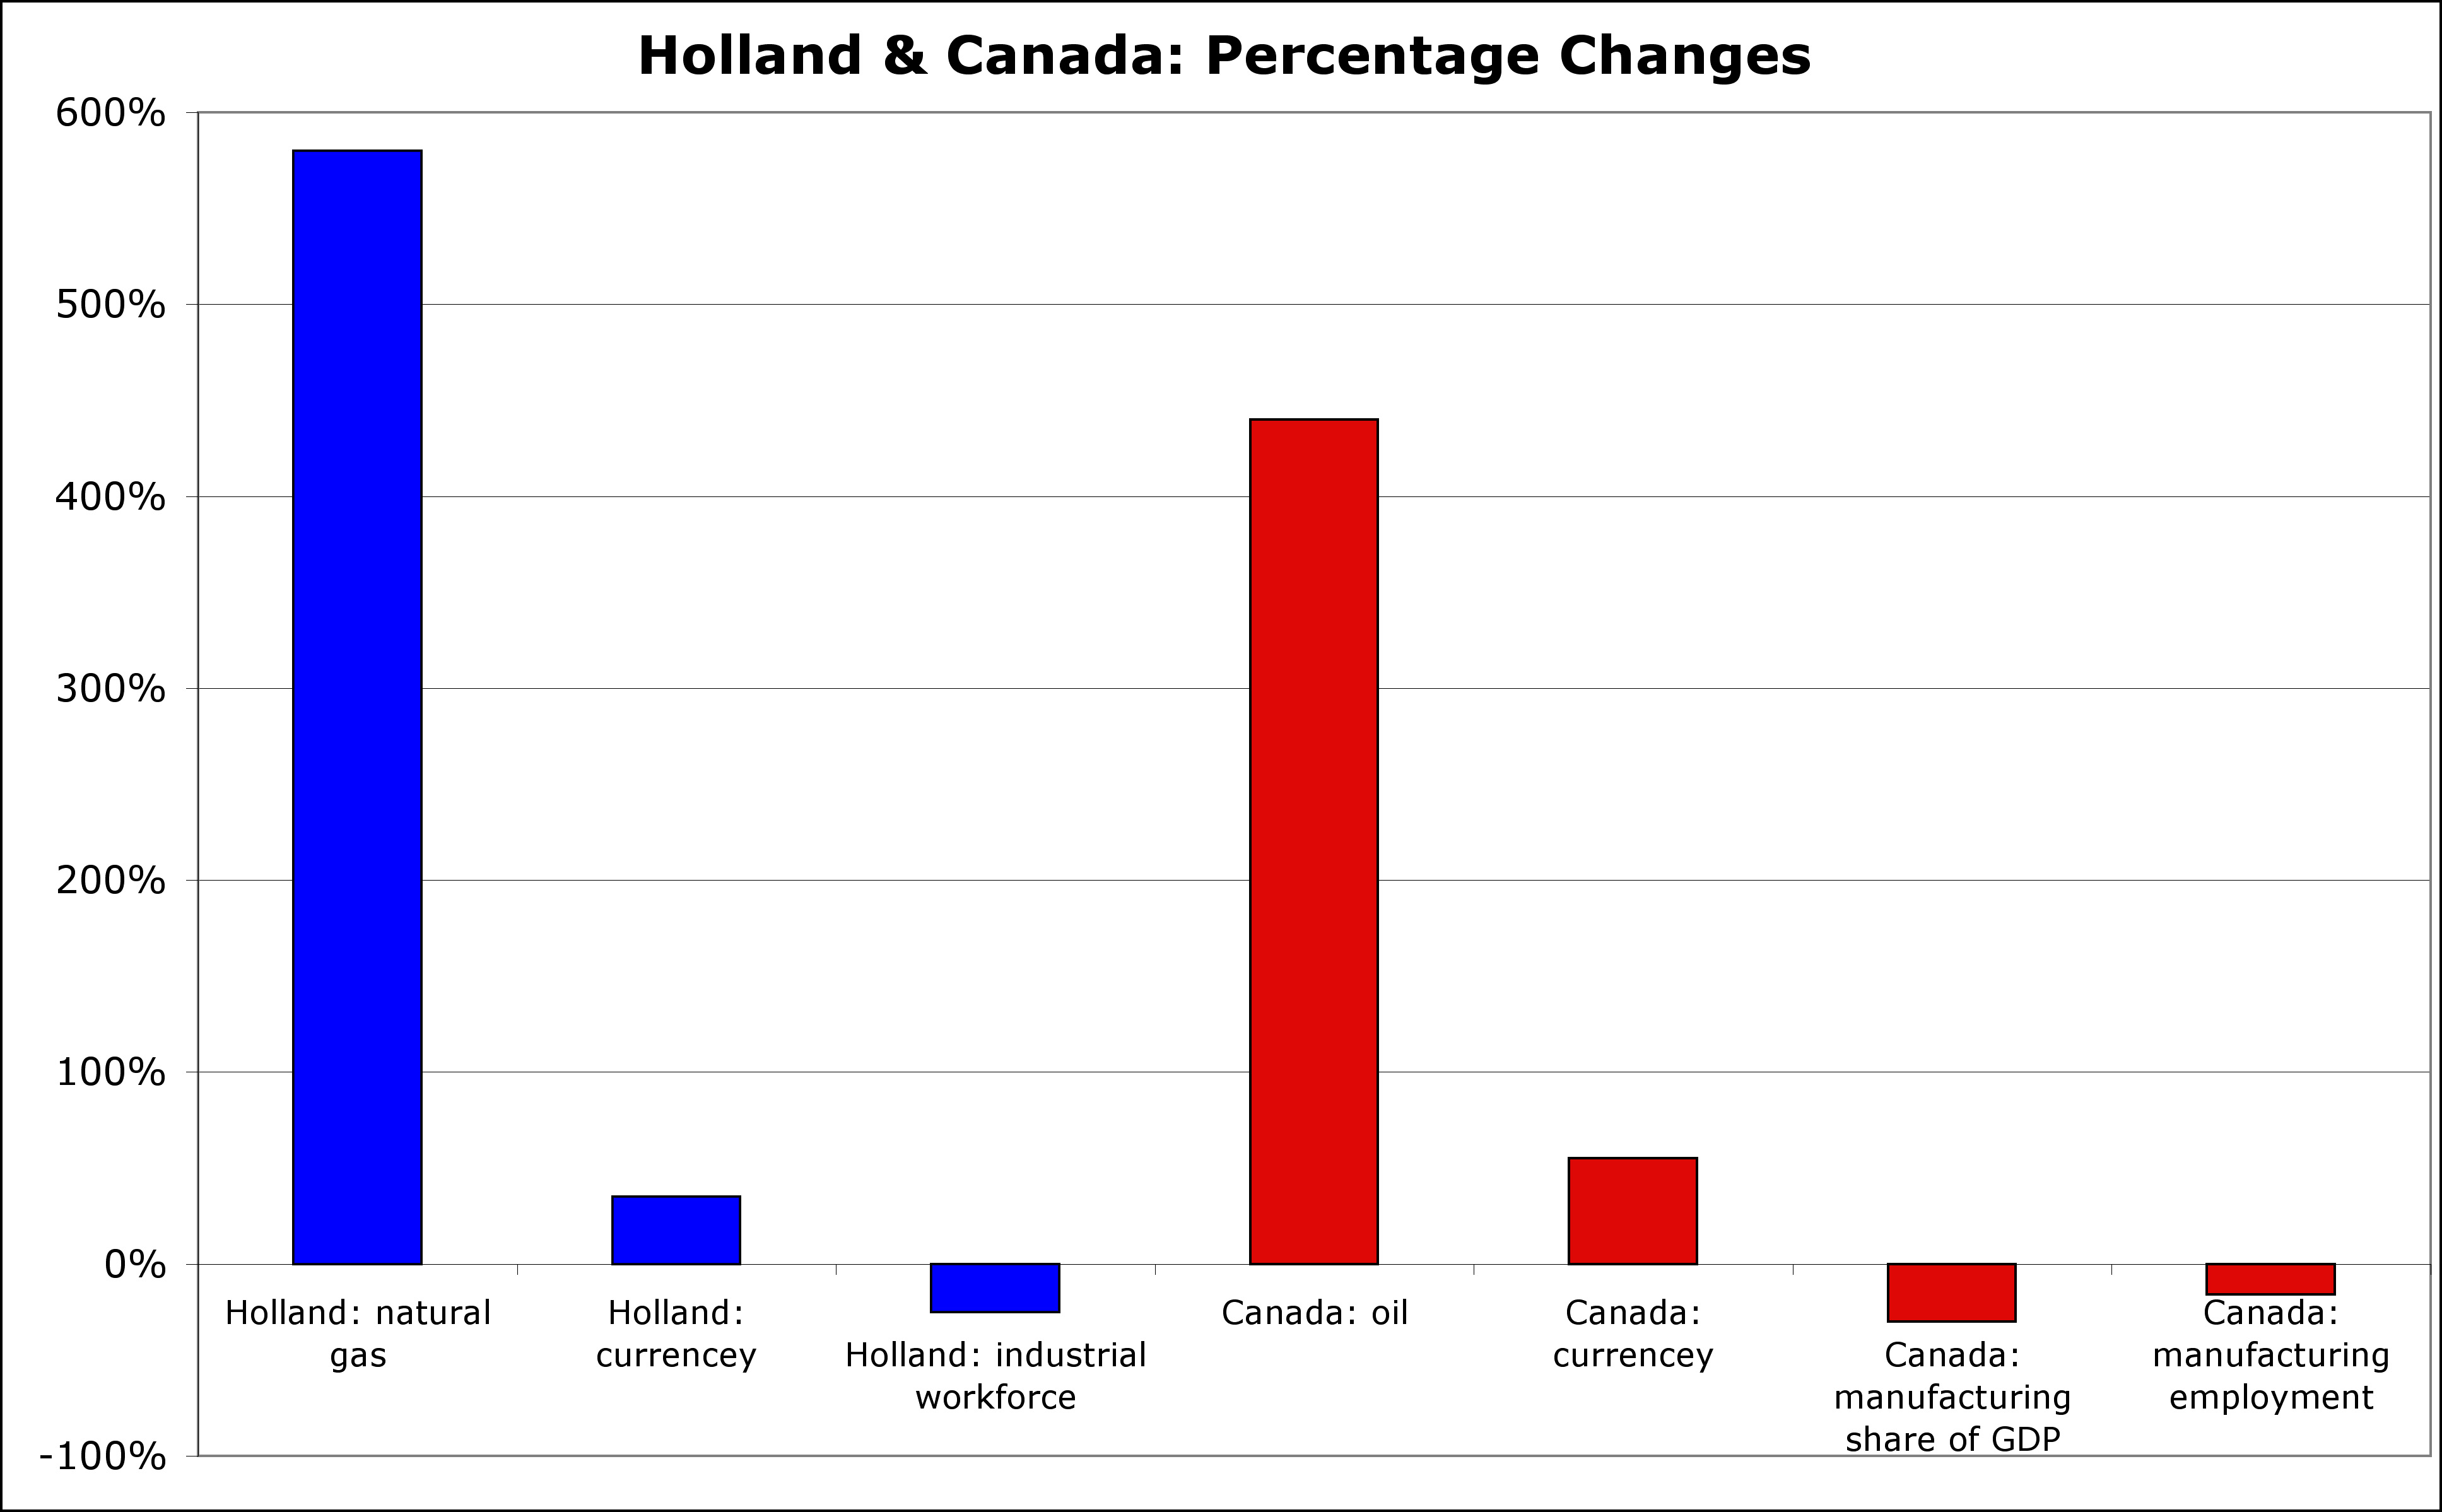 Holland & Canada: Percentage Changes